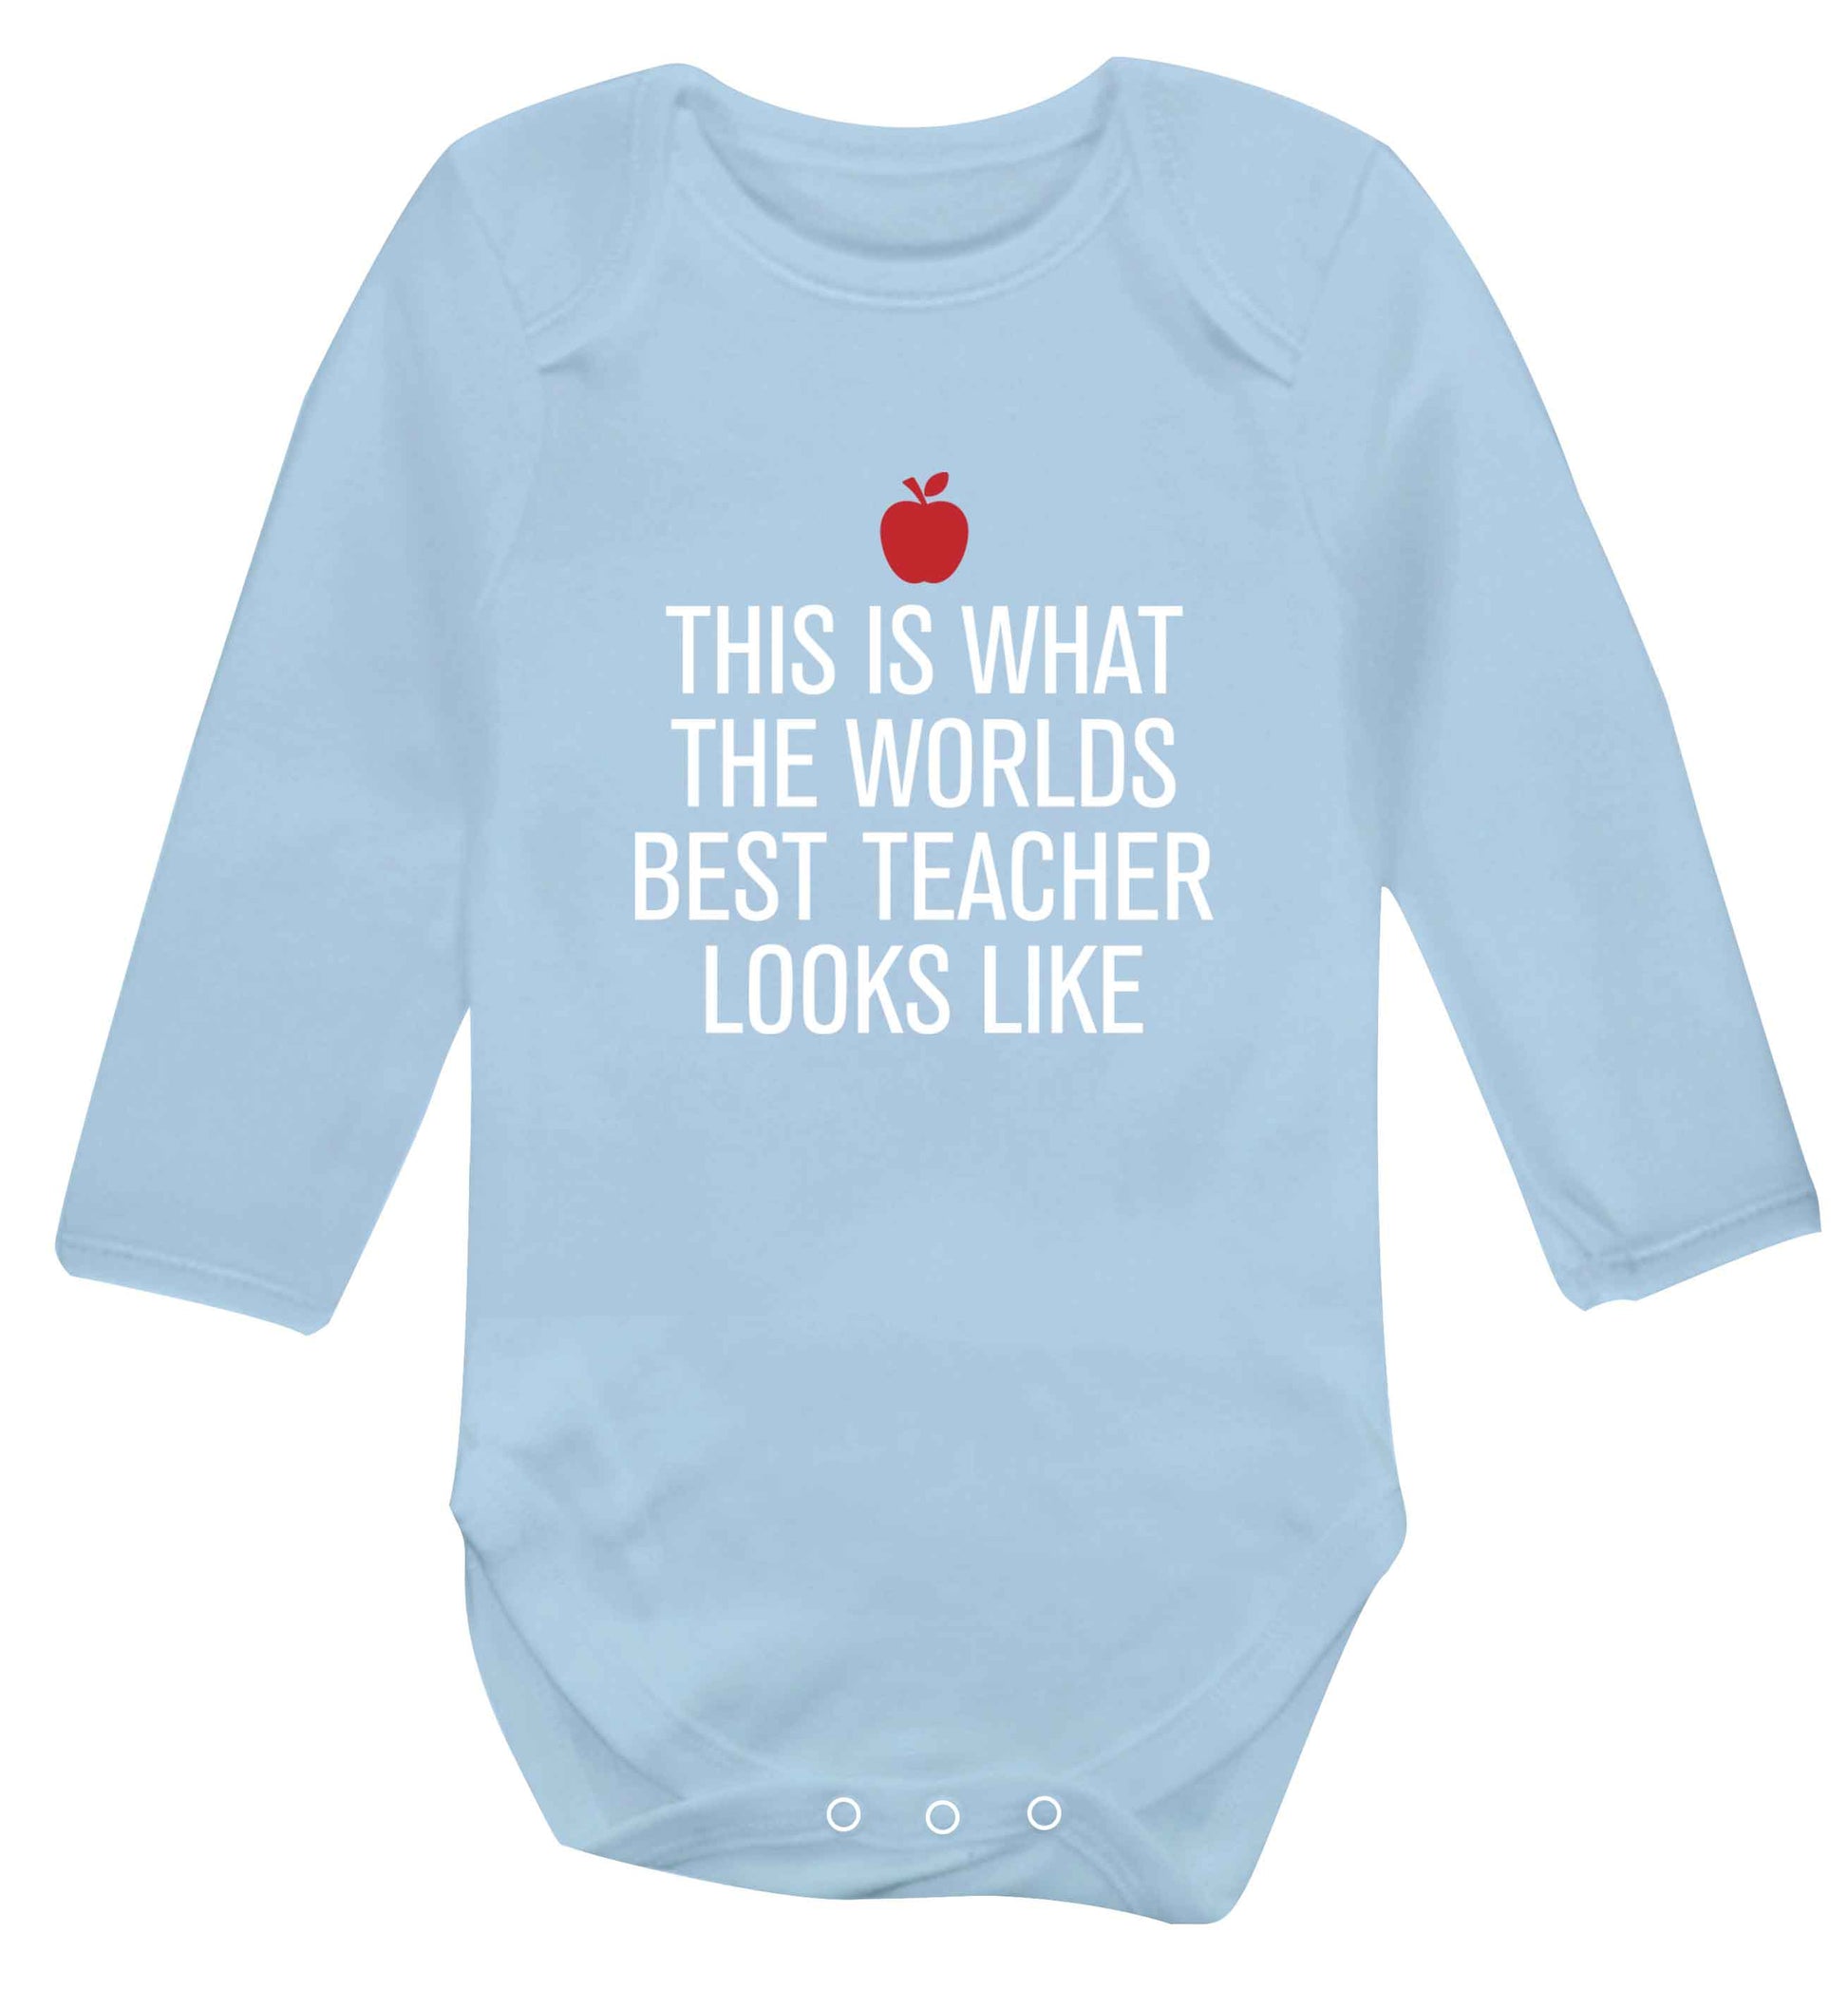 This is what the worlds best teacher looks like baby vest long sleeved pale blue 6-12 months